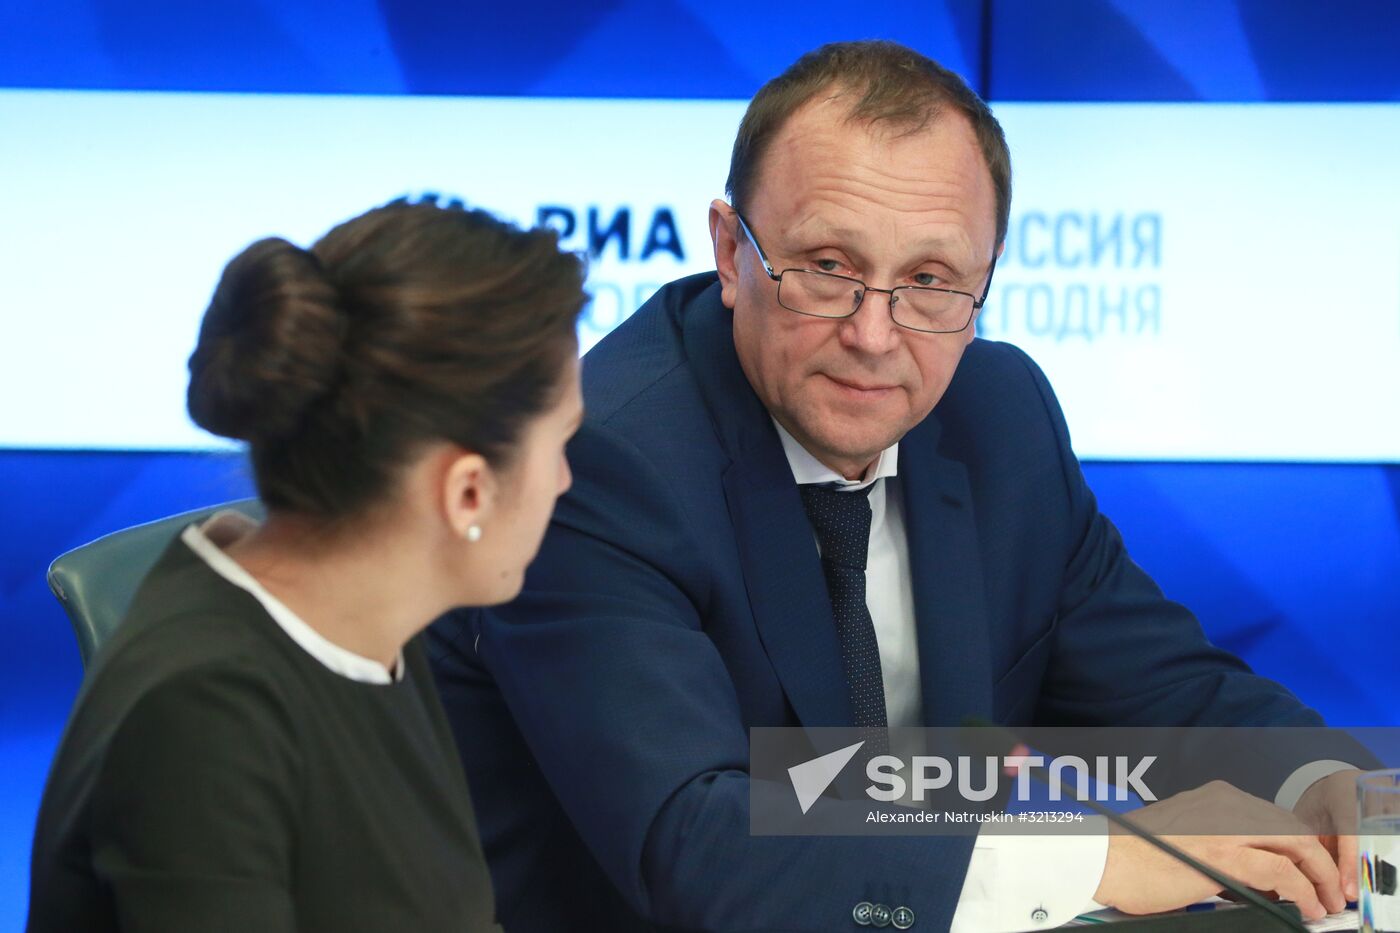 News conference on quality of higher education institutions admission